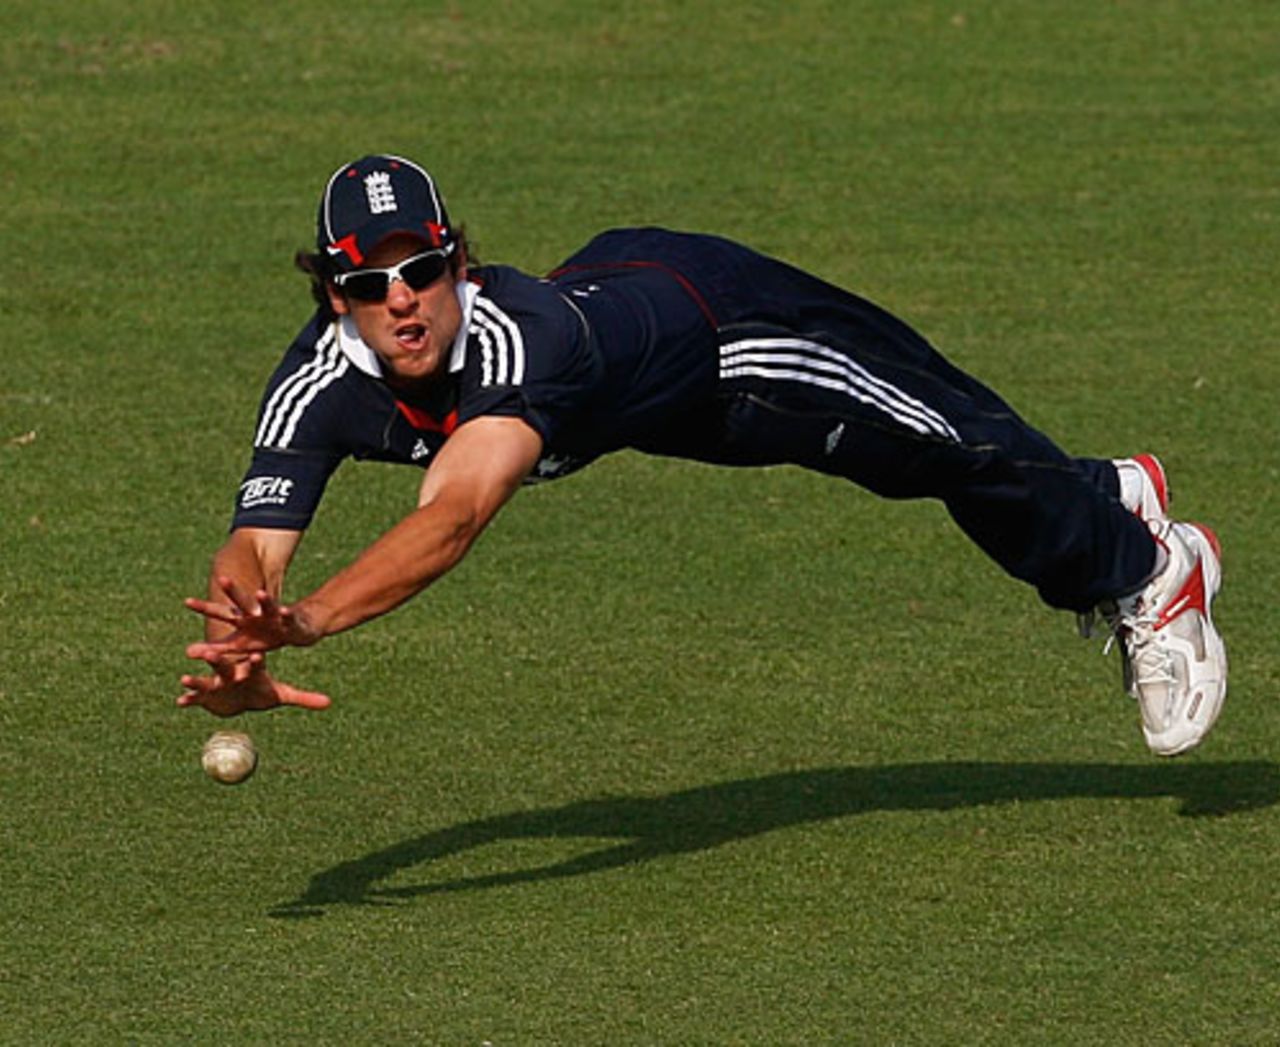 Alastair Cook couldn't quite reach a chance from James Tredwell's first over that landed just short2nd ODI, Dhaka, March 2, 2010